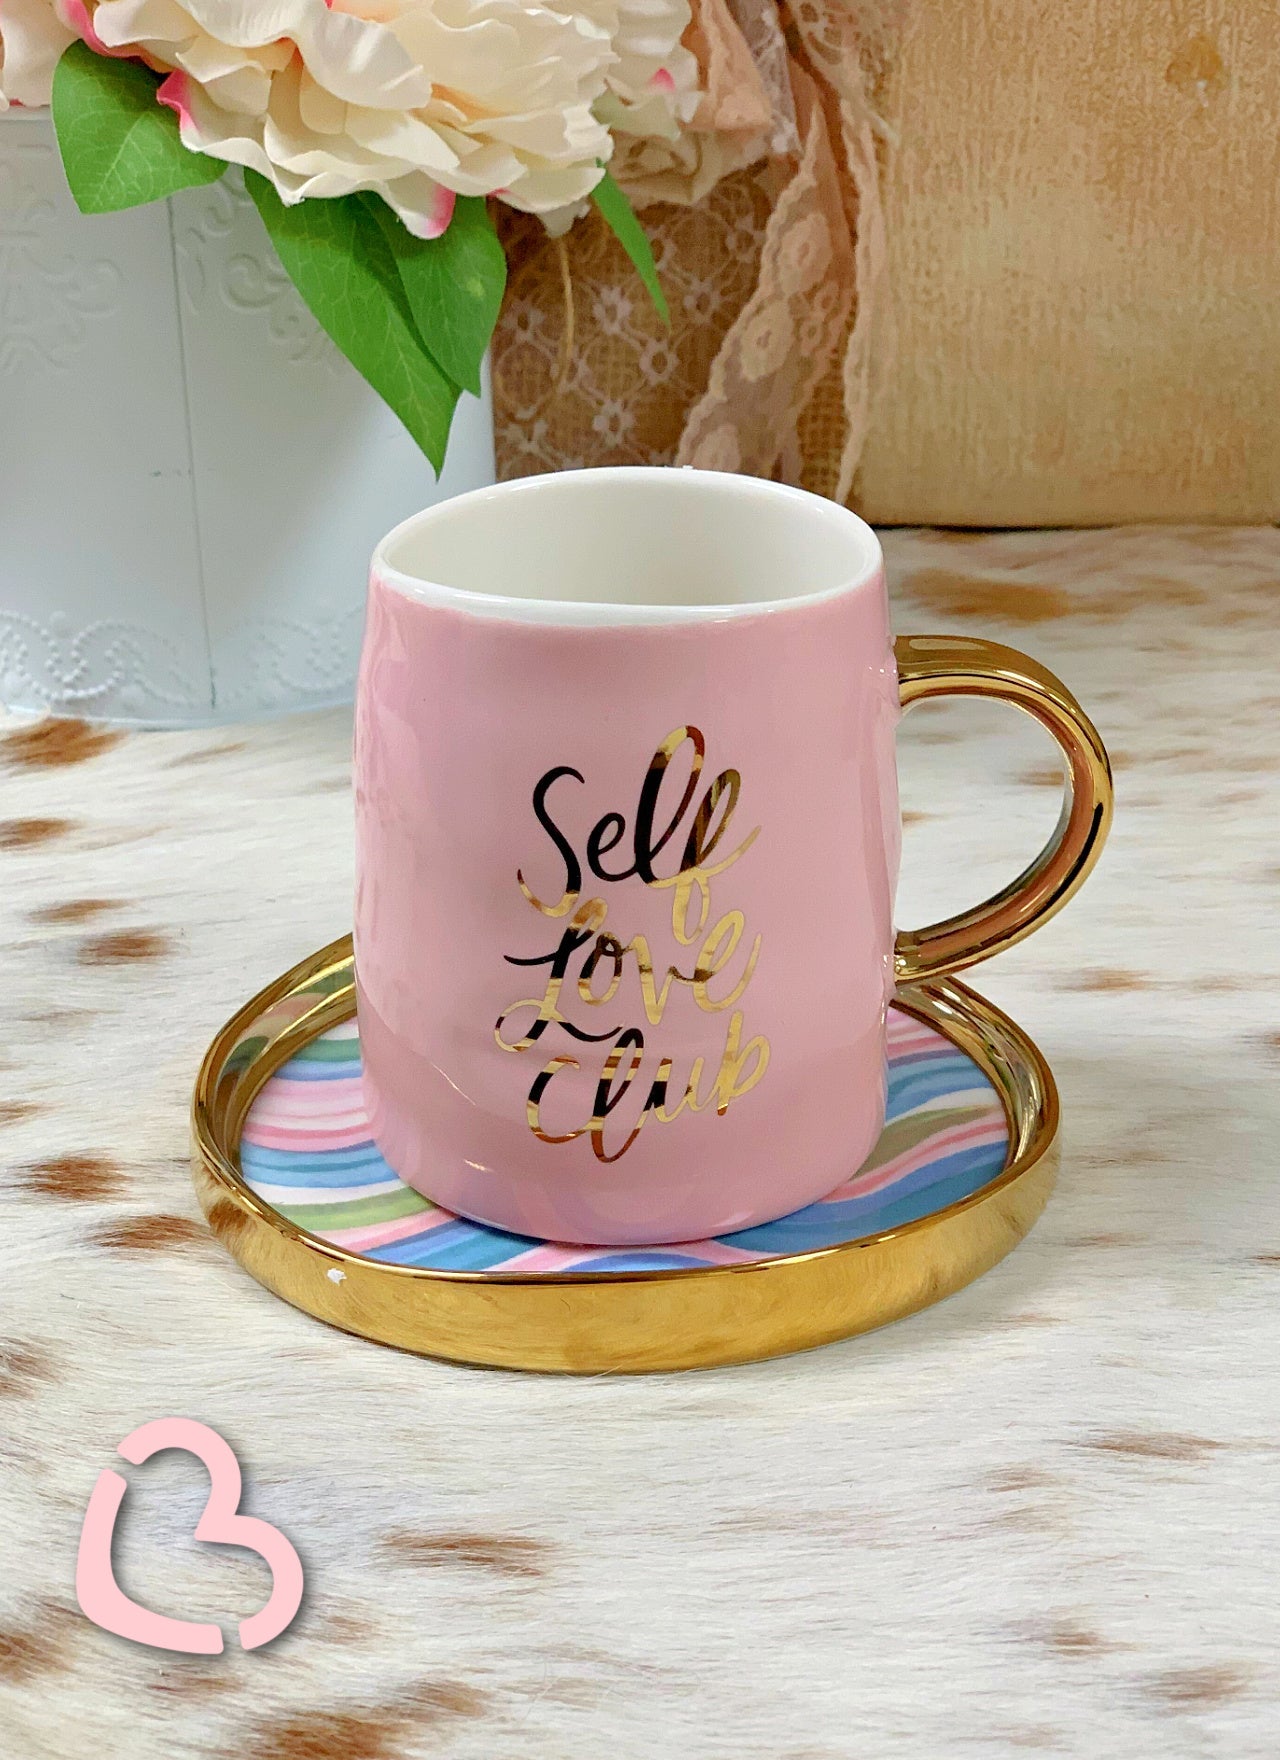 Self Love Cup and Saucer Kitchen 78 